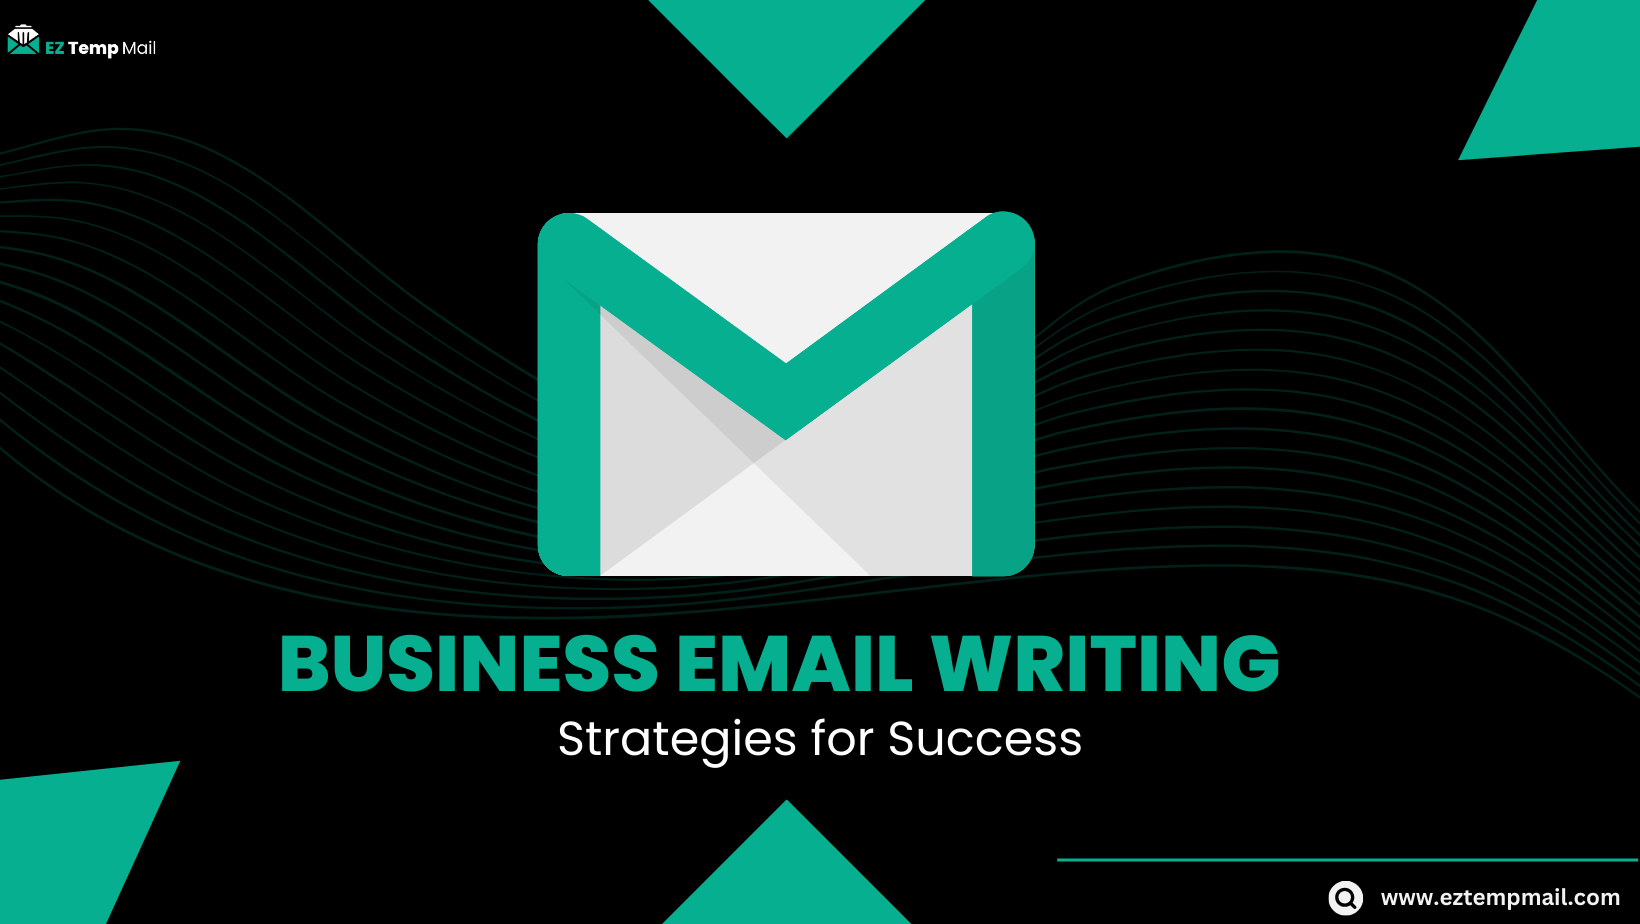 Email Writing Best Practices for Business Communication